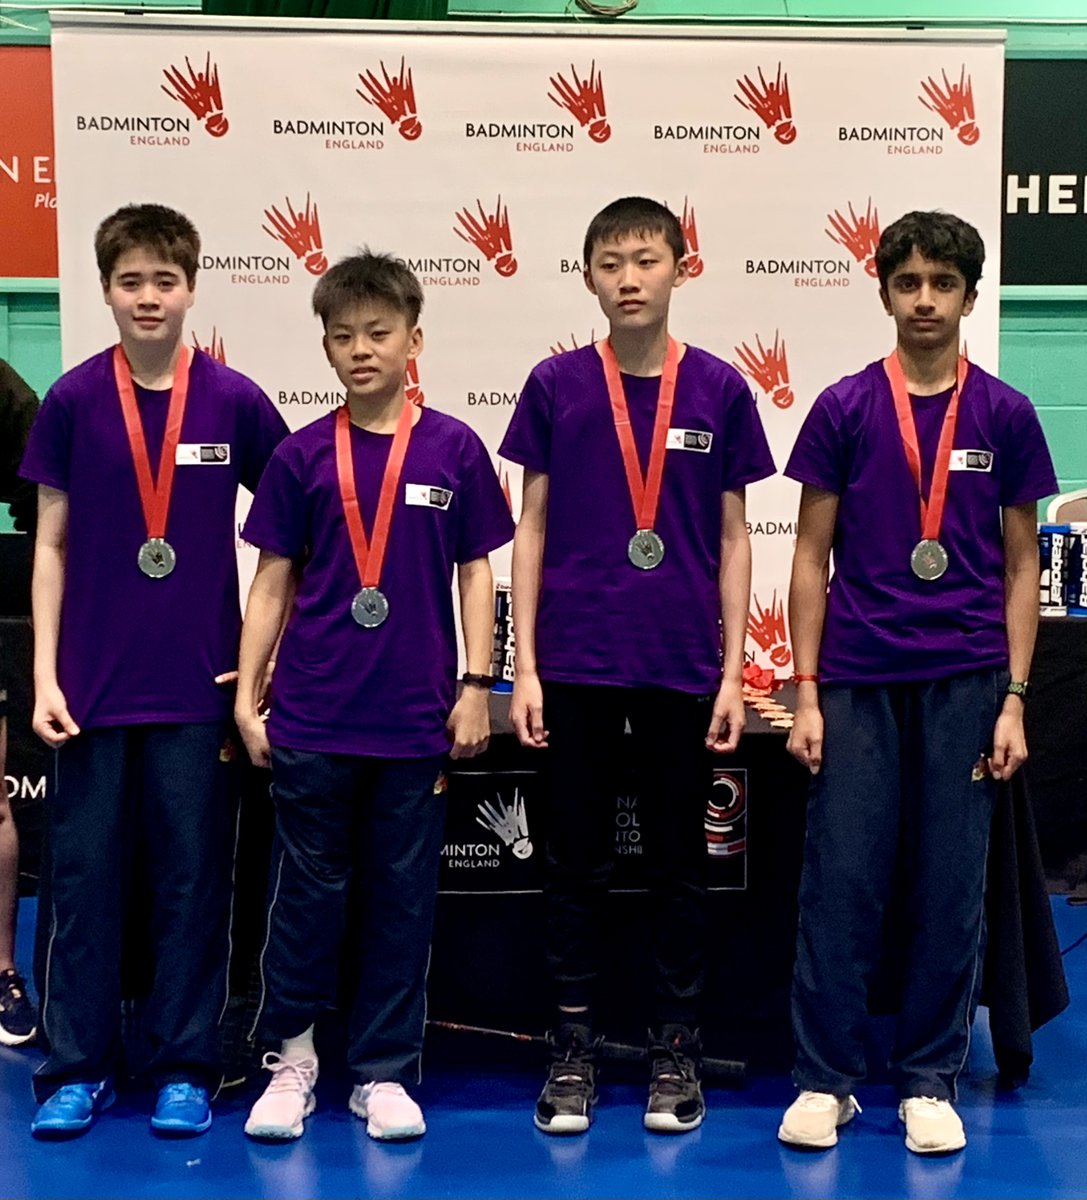 Our U14 badminton team made history at the National Finals in Milton Keynes at last weekend, finishing as National Runners Up. 🏸🏅 Well done Punit, Michael, Jia, and Daniel for such an exceptional performance! 👏